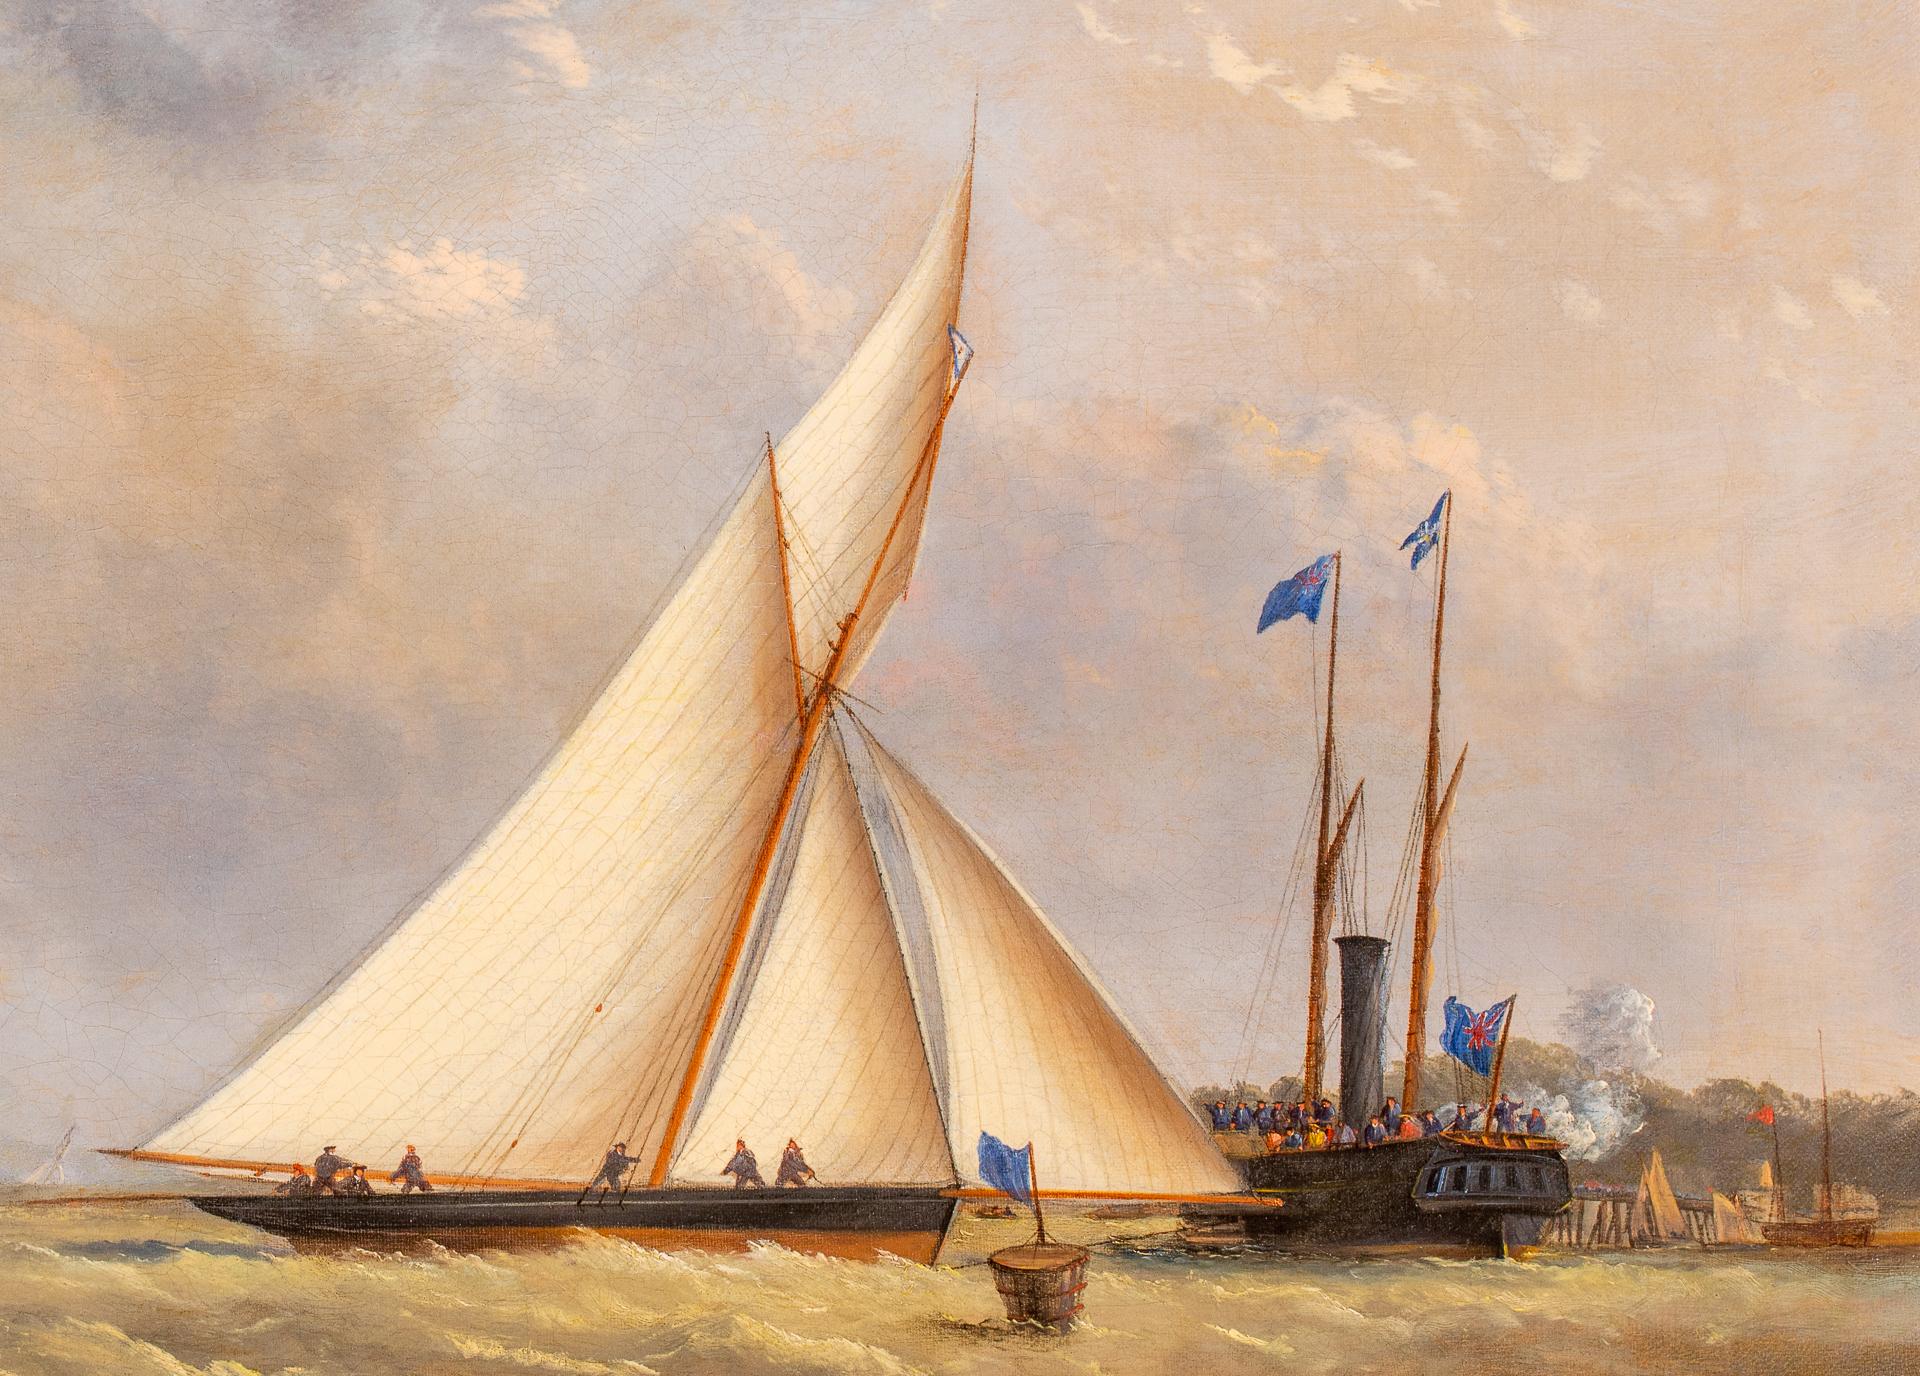 The premier artist of yacht racing in the south of England, Arthur Wellington Fowles captures the victory of the Cutter SPHINX in the first regatta of the Royal Albert Yacht Club in 1866, winning the Albert Cup.

SPHINX was a 47 ton cutter owned by